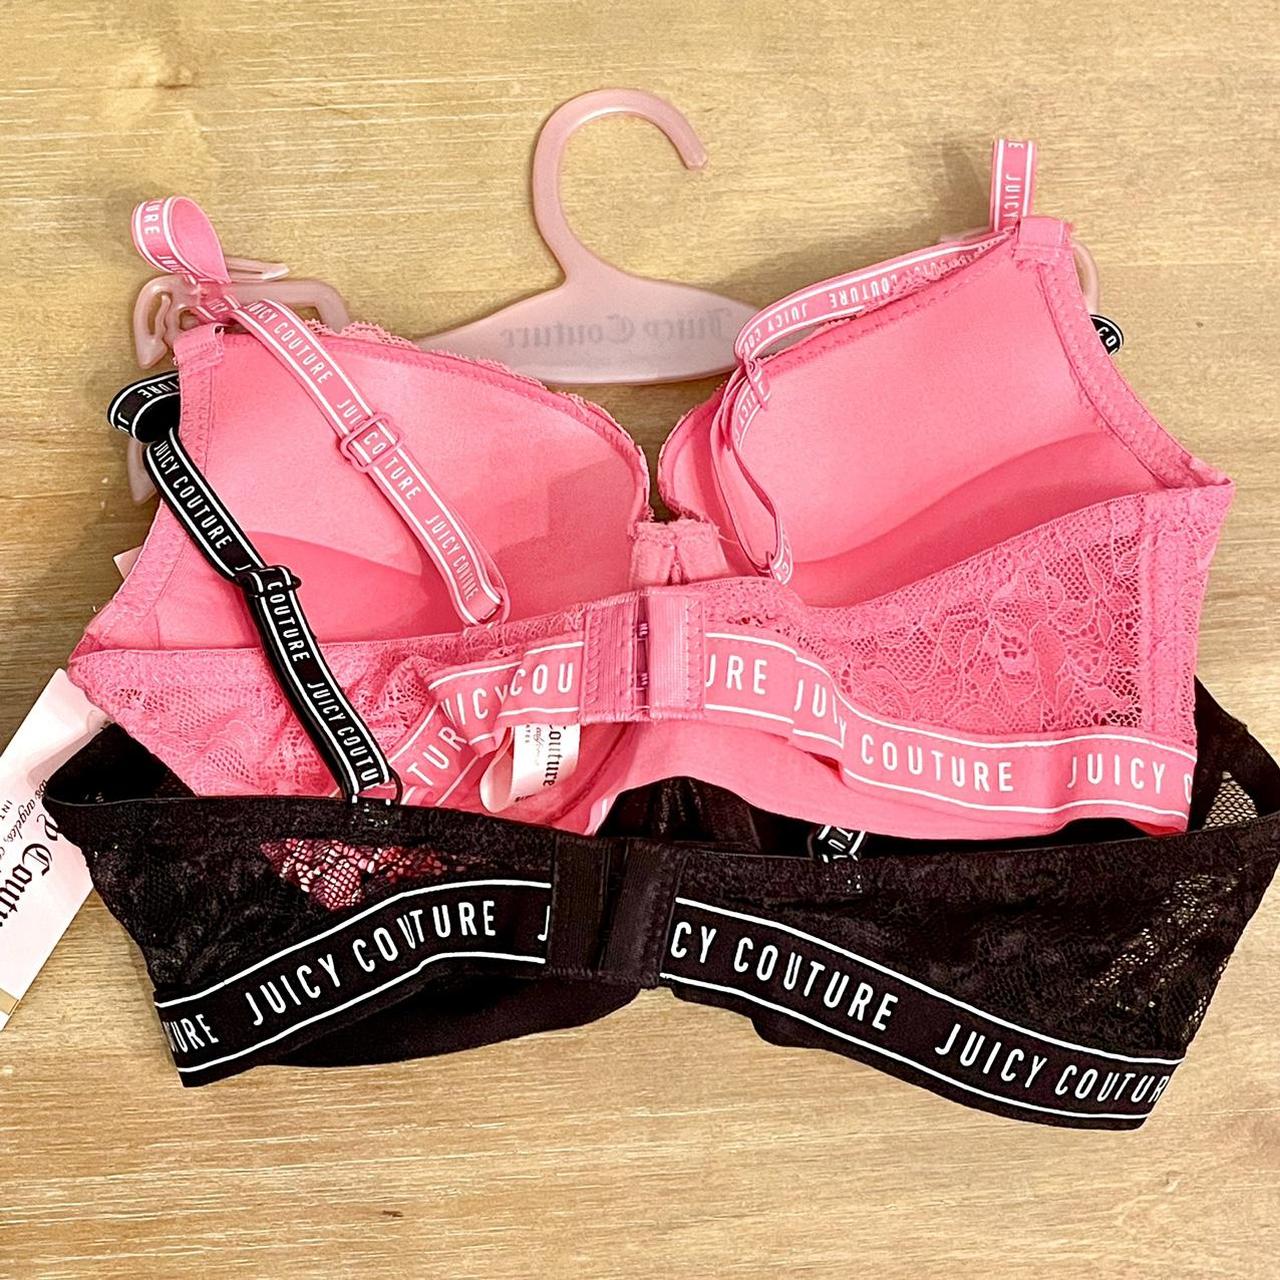 Juicy Couture bra set of 2 both for $25 or $15 each - Depop